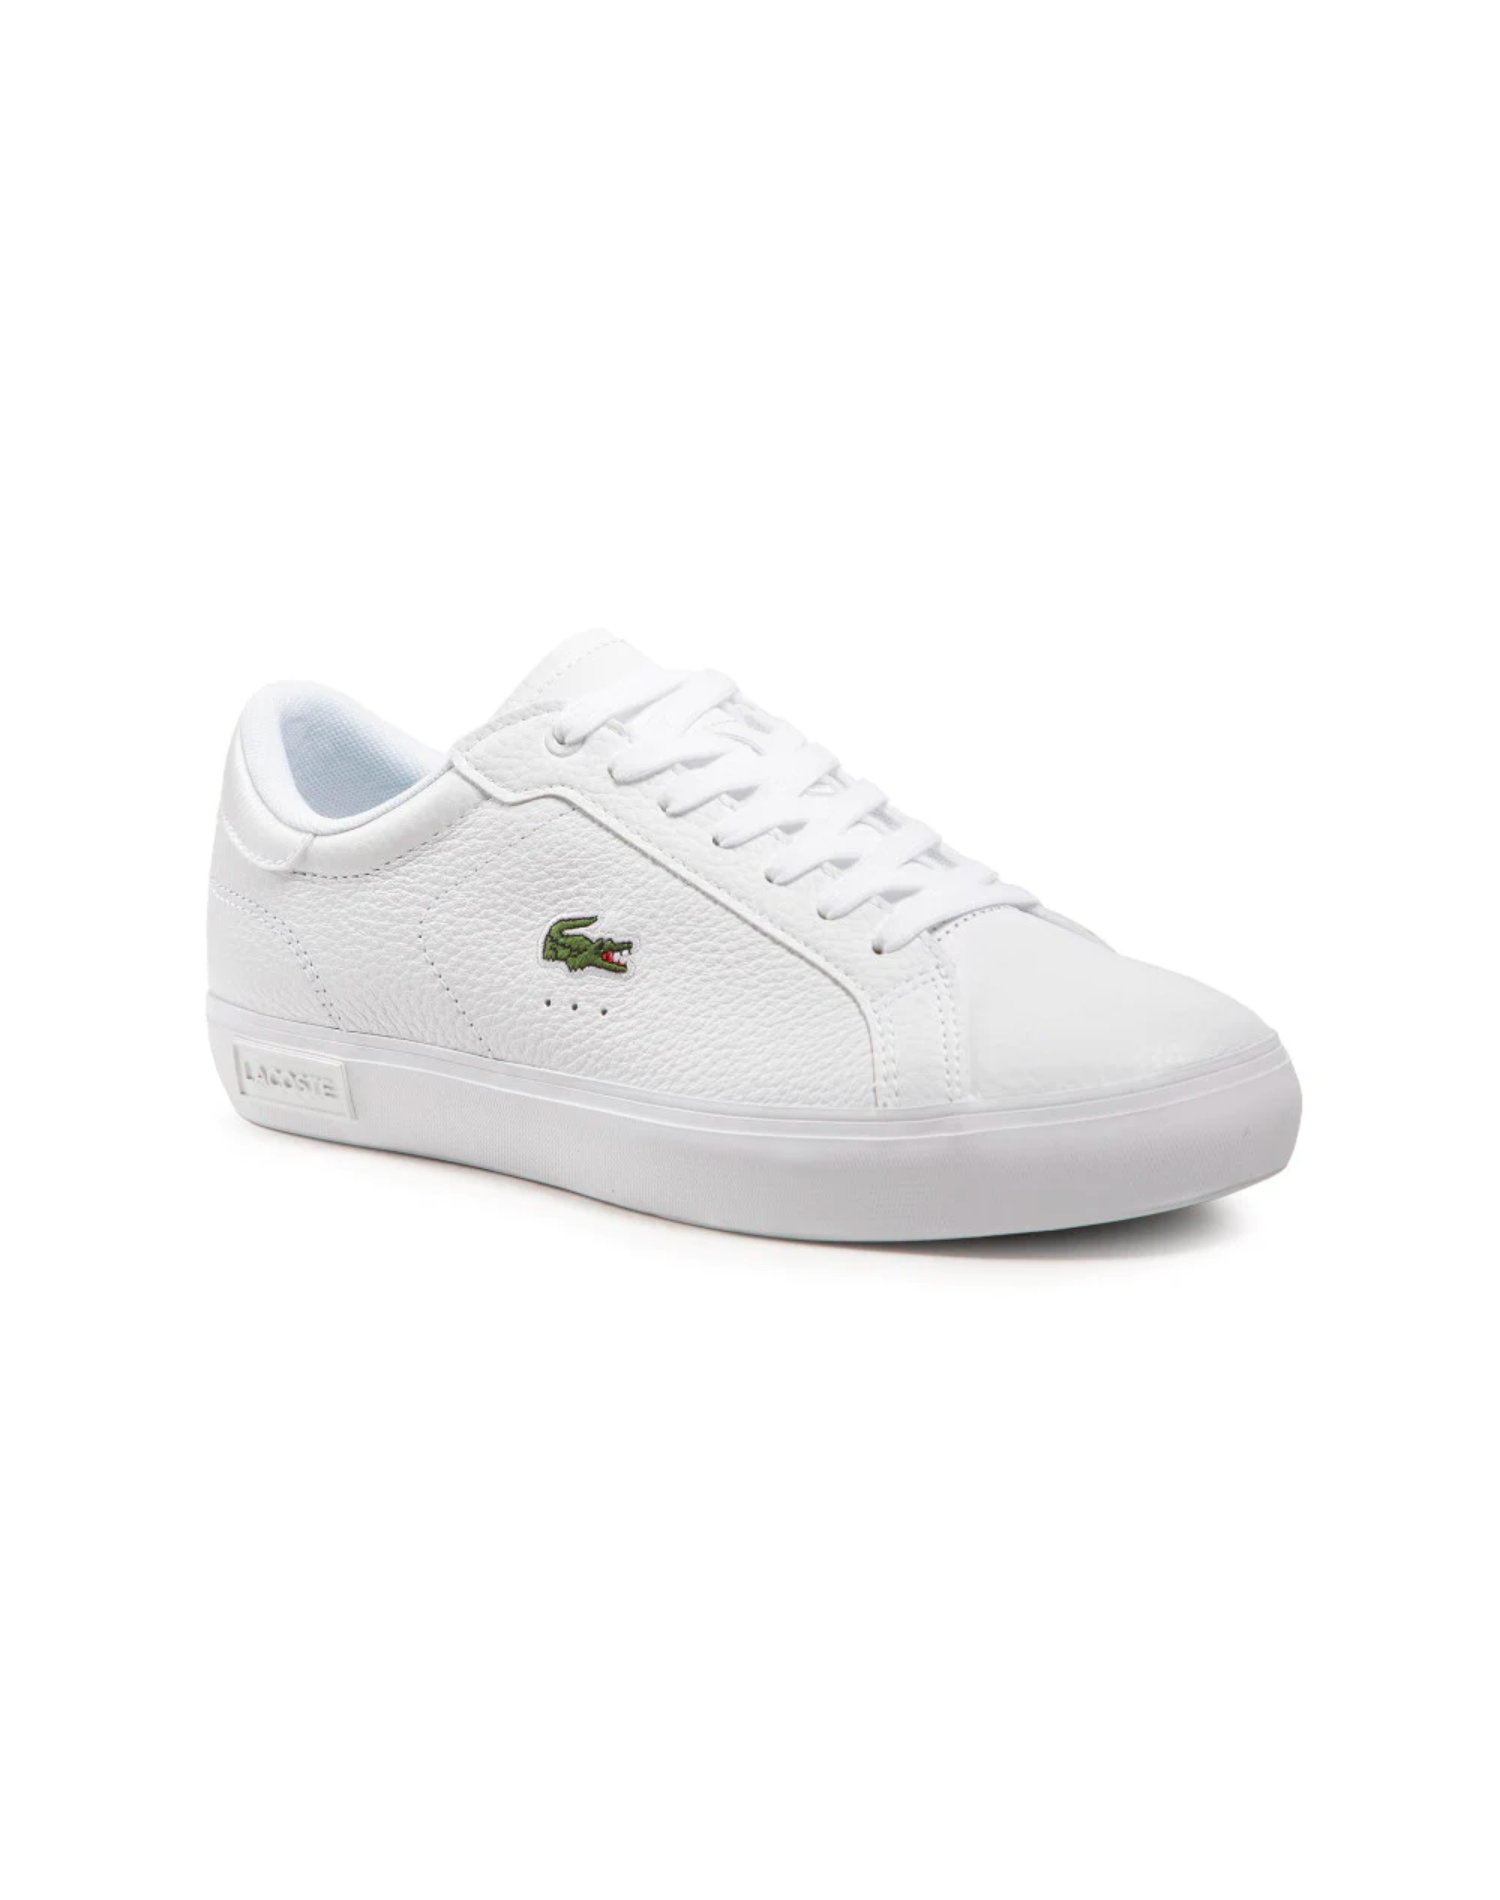 Lacoste Court Slam 319 Suede mix chunky sneakers in white | ASOS